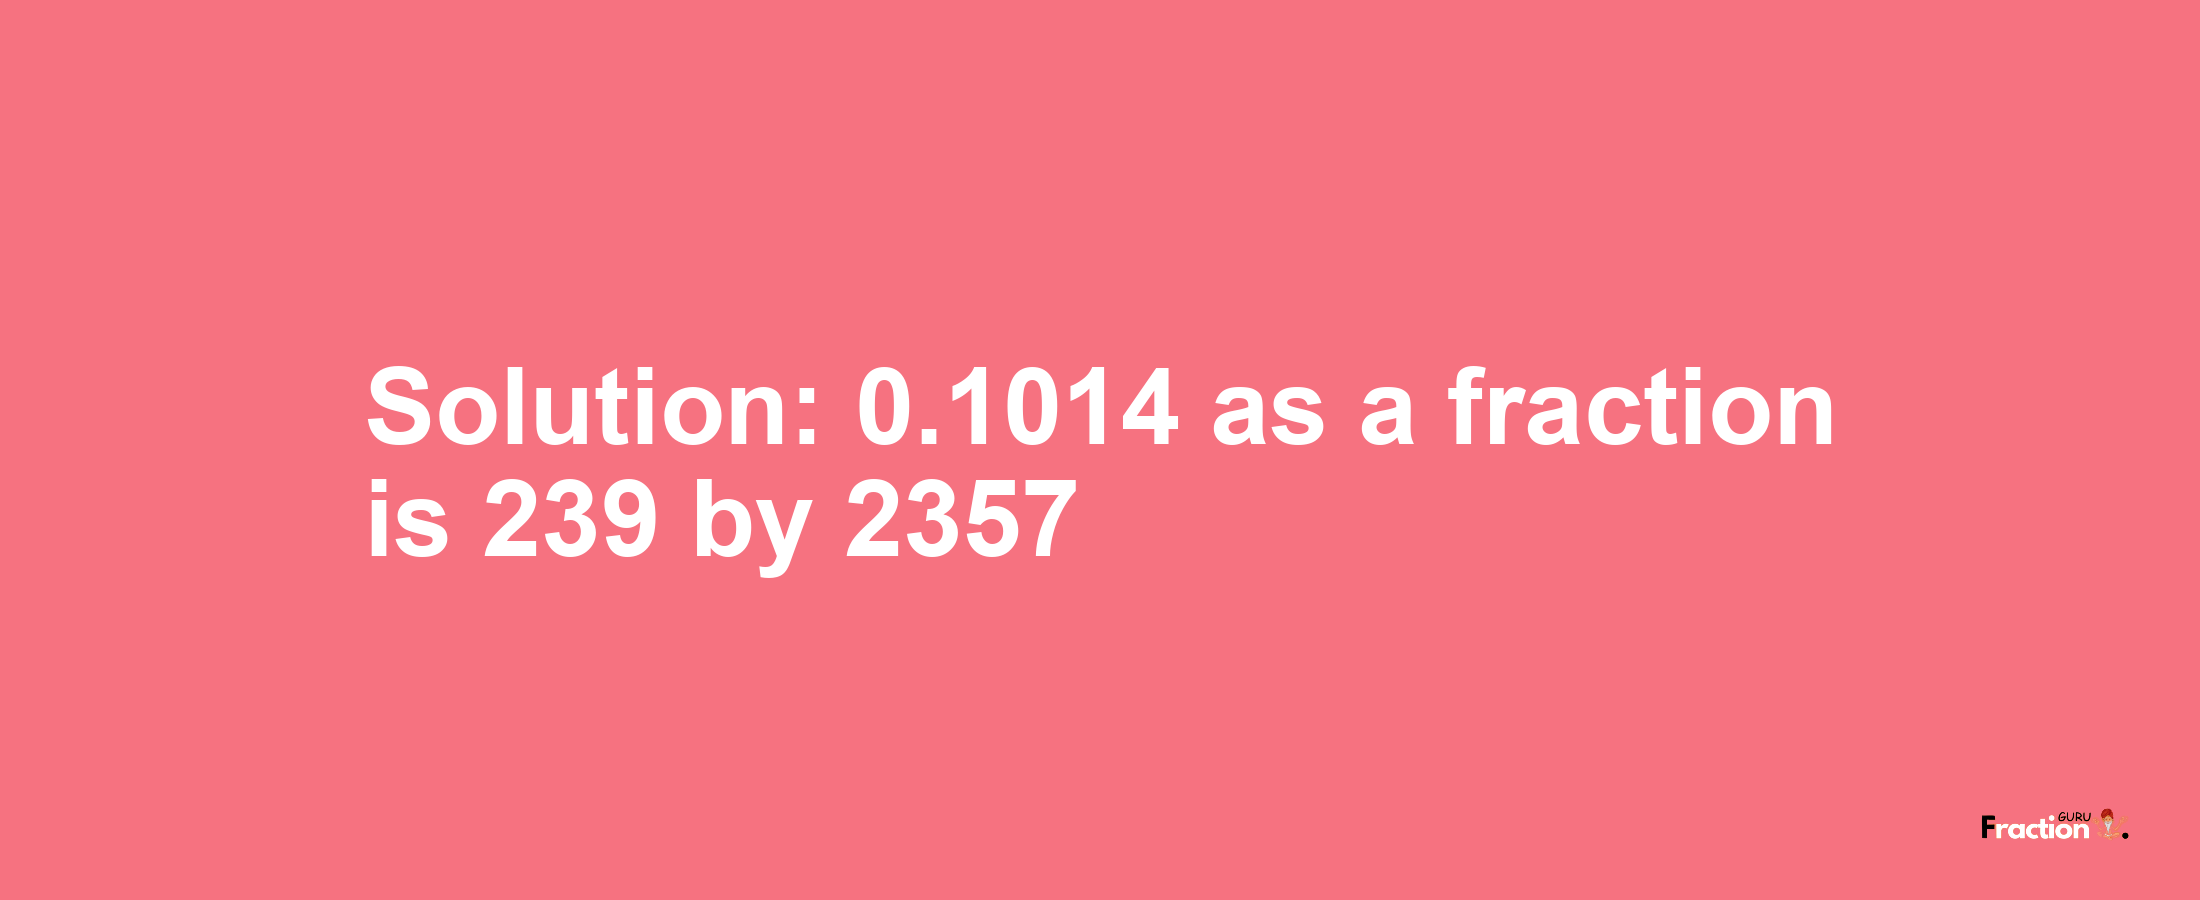 Solution:0.1014 as a fraction is 239/2357